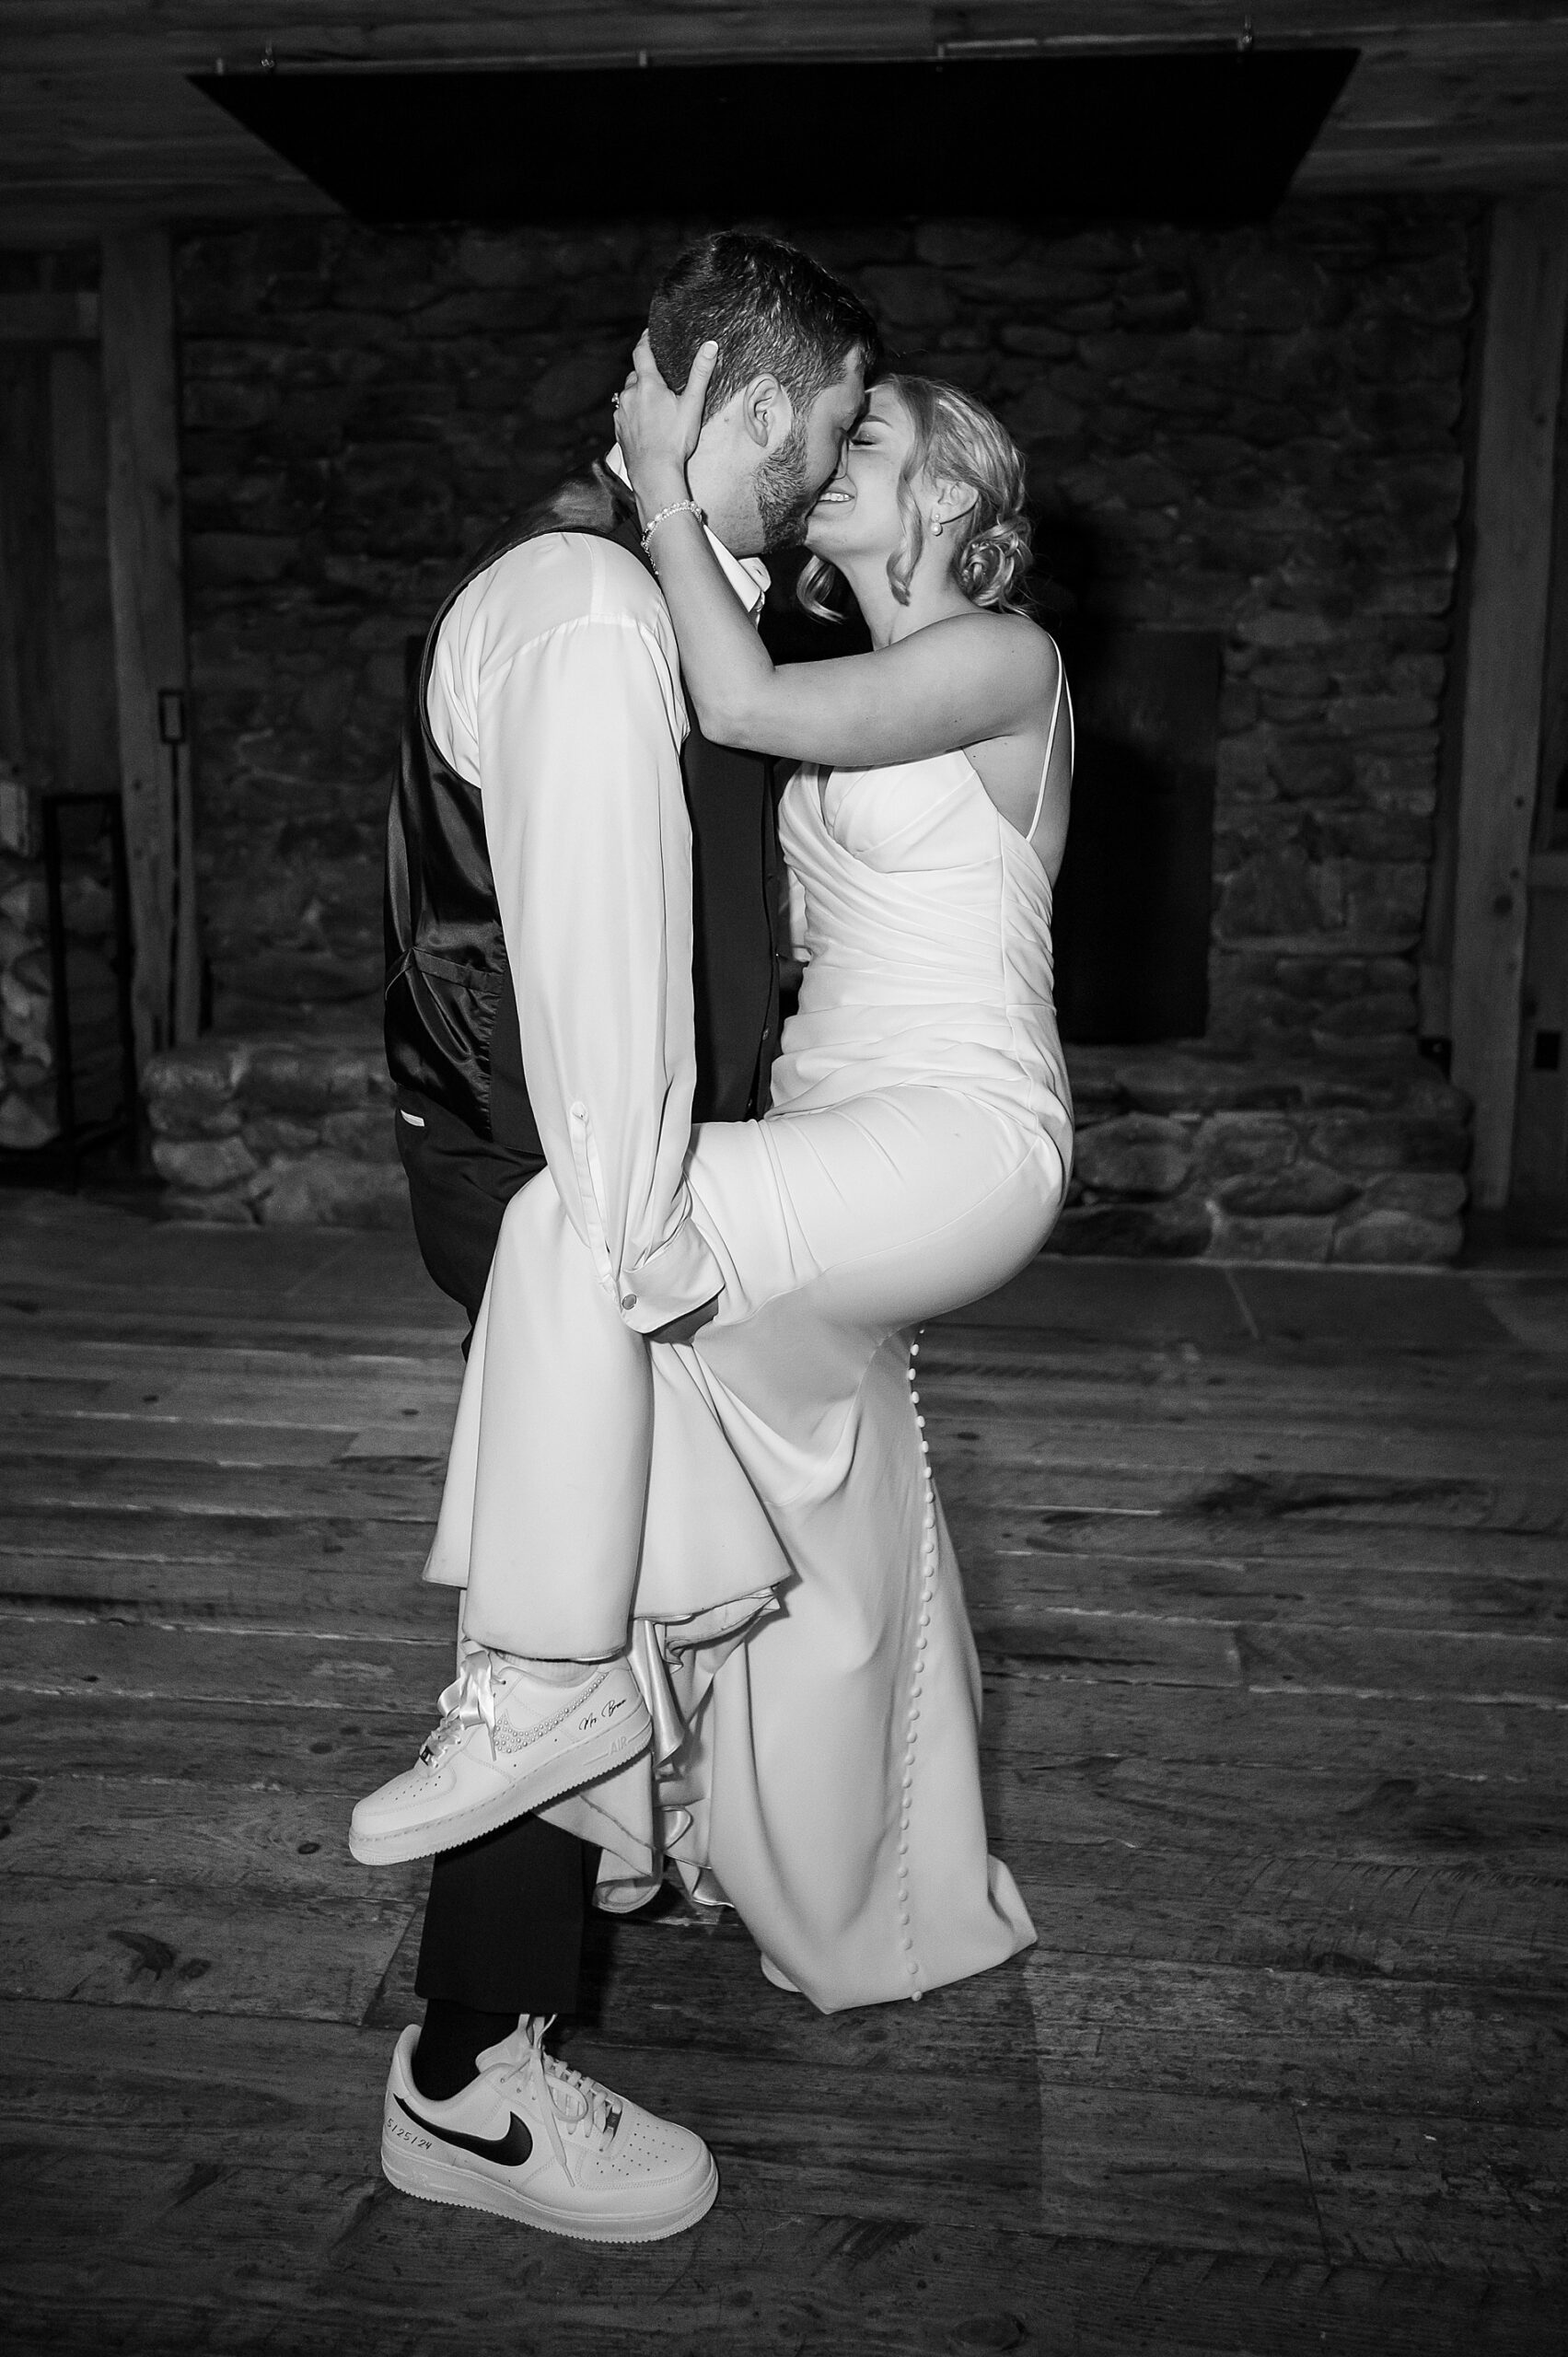 timeless wedding portraits of couple showing off their personalized Nikes